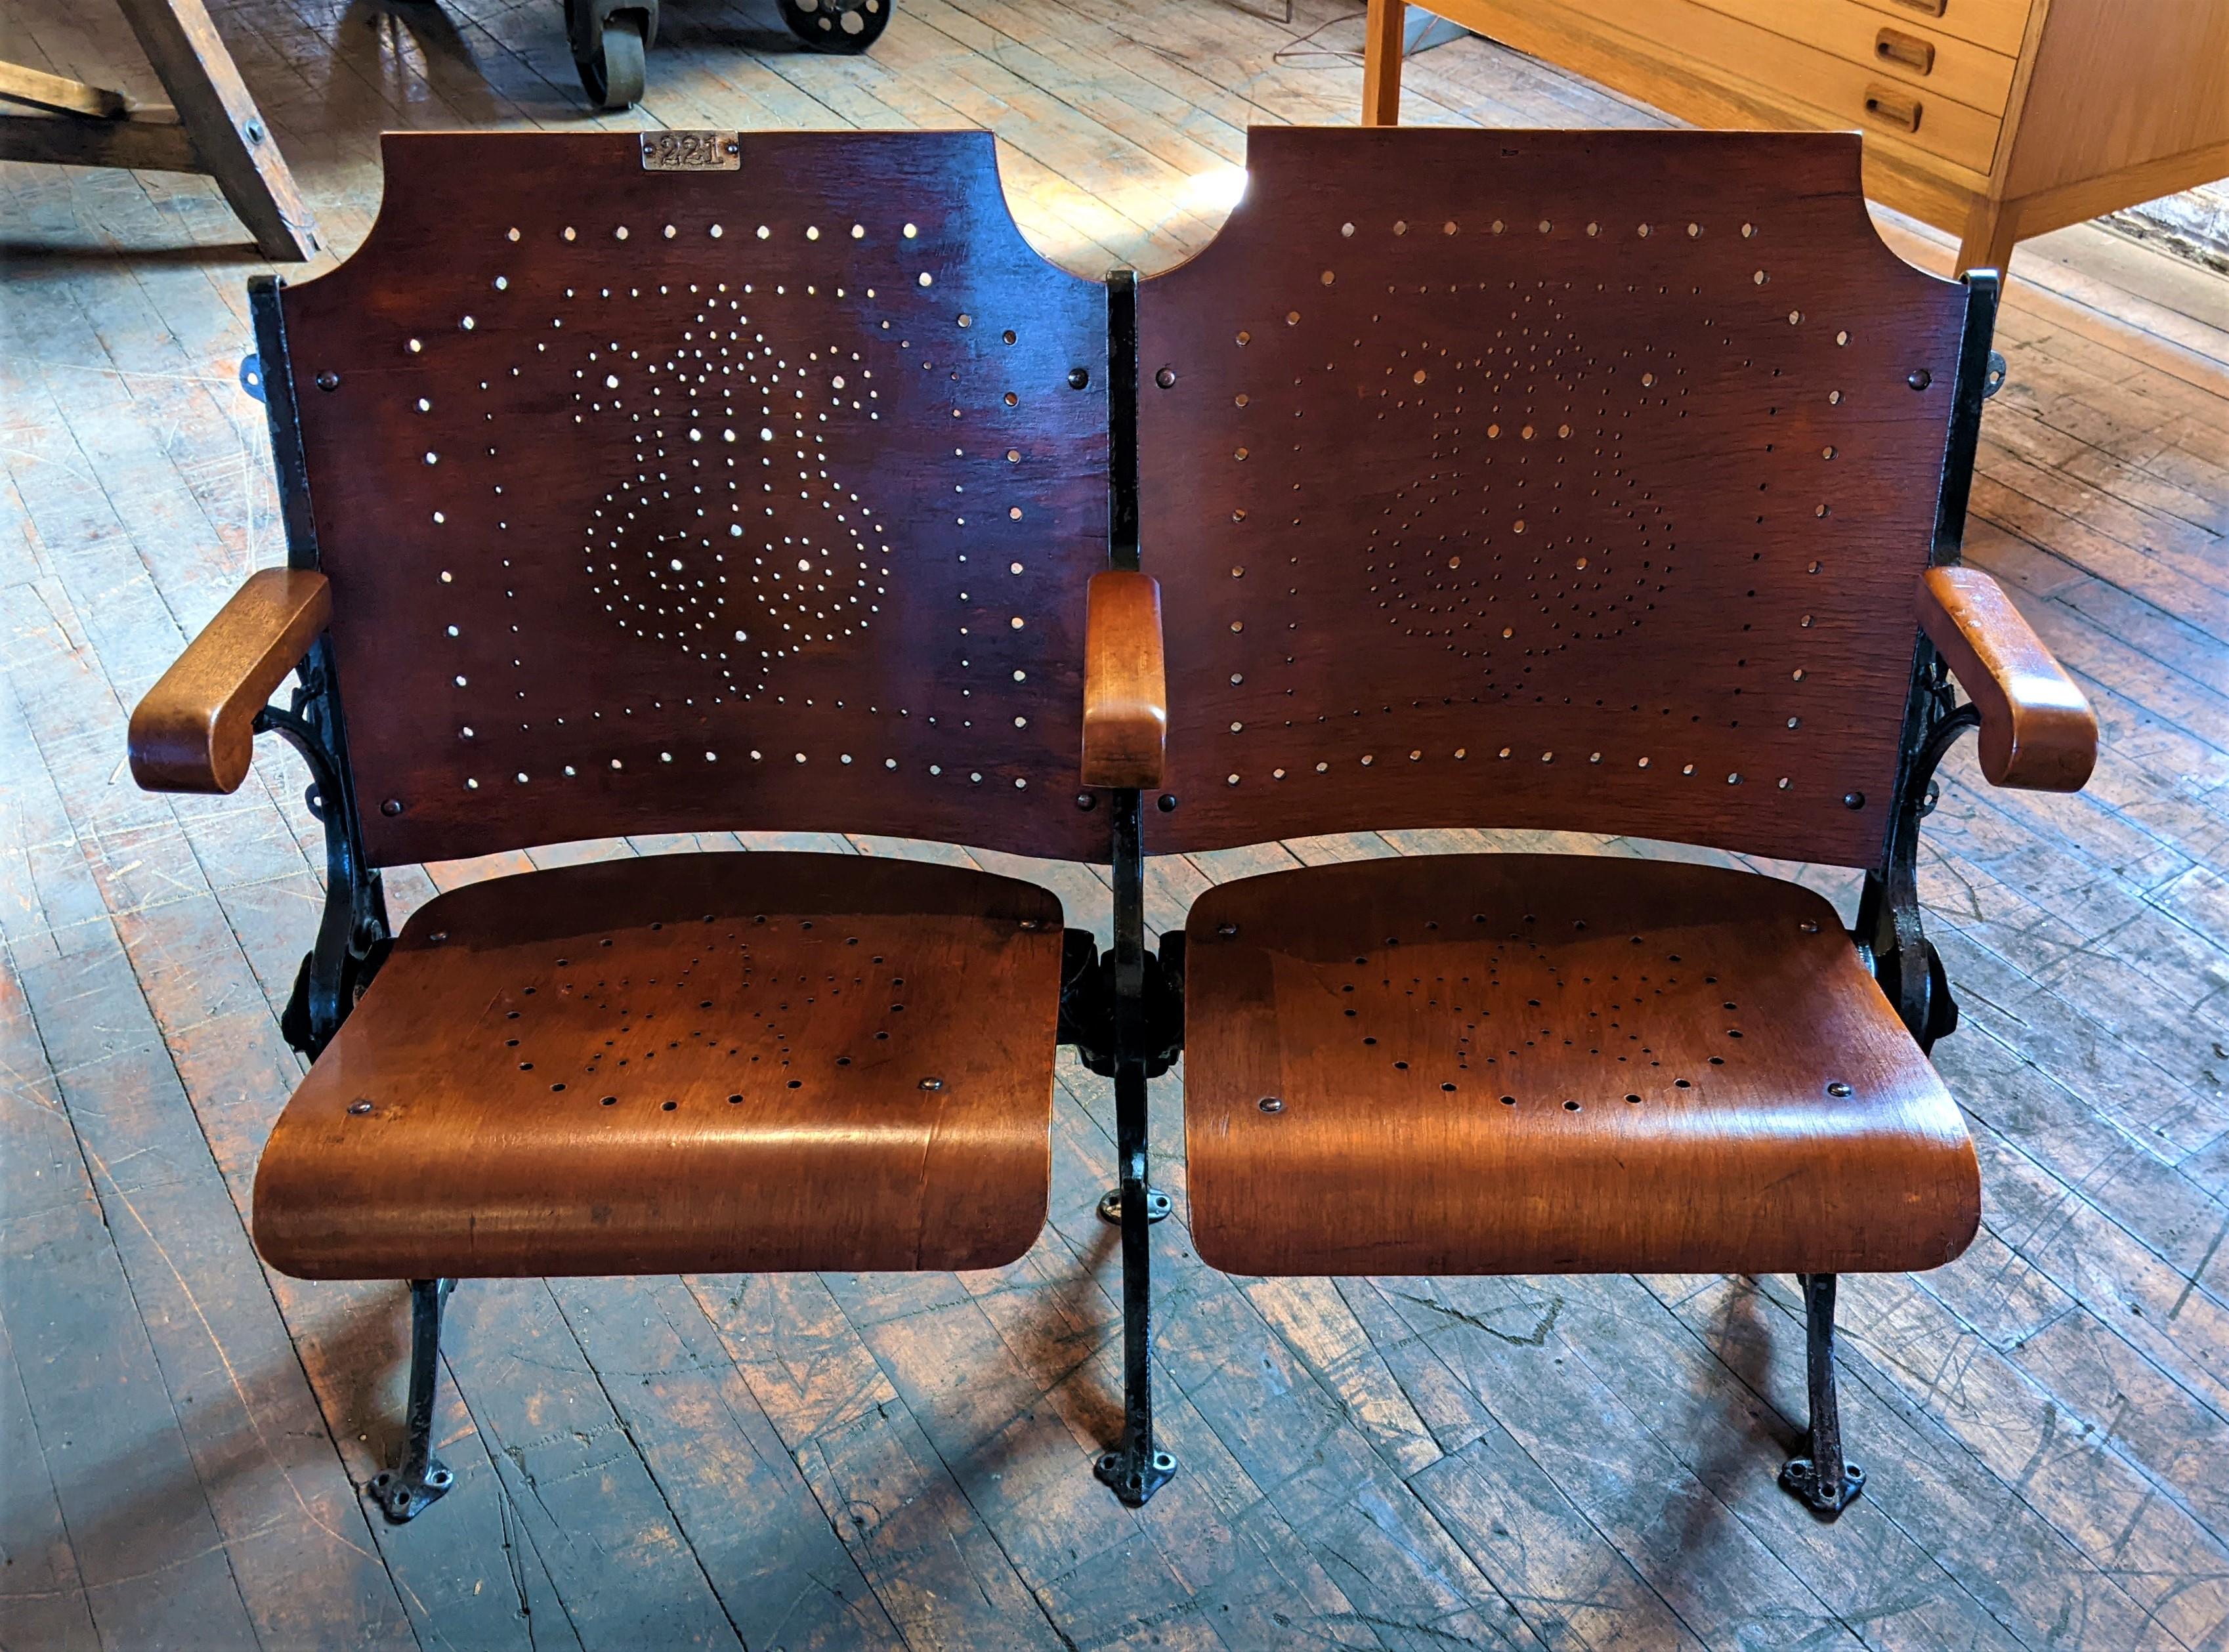 Antique cast iron & wood theater seats.

Overall Dimensions: 43 1/4